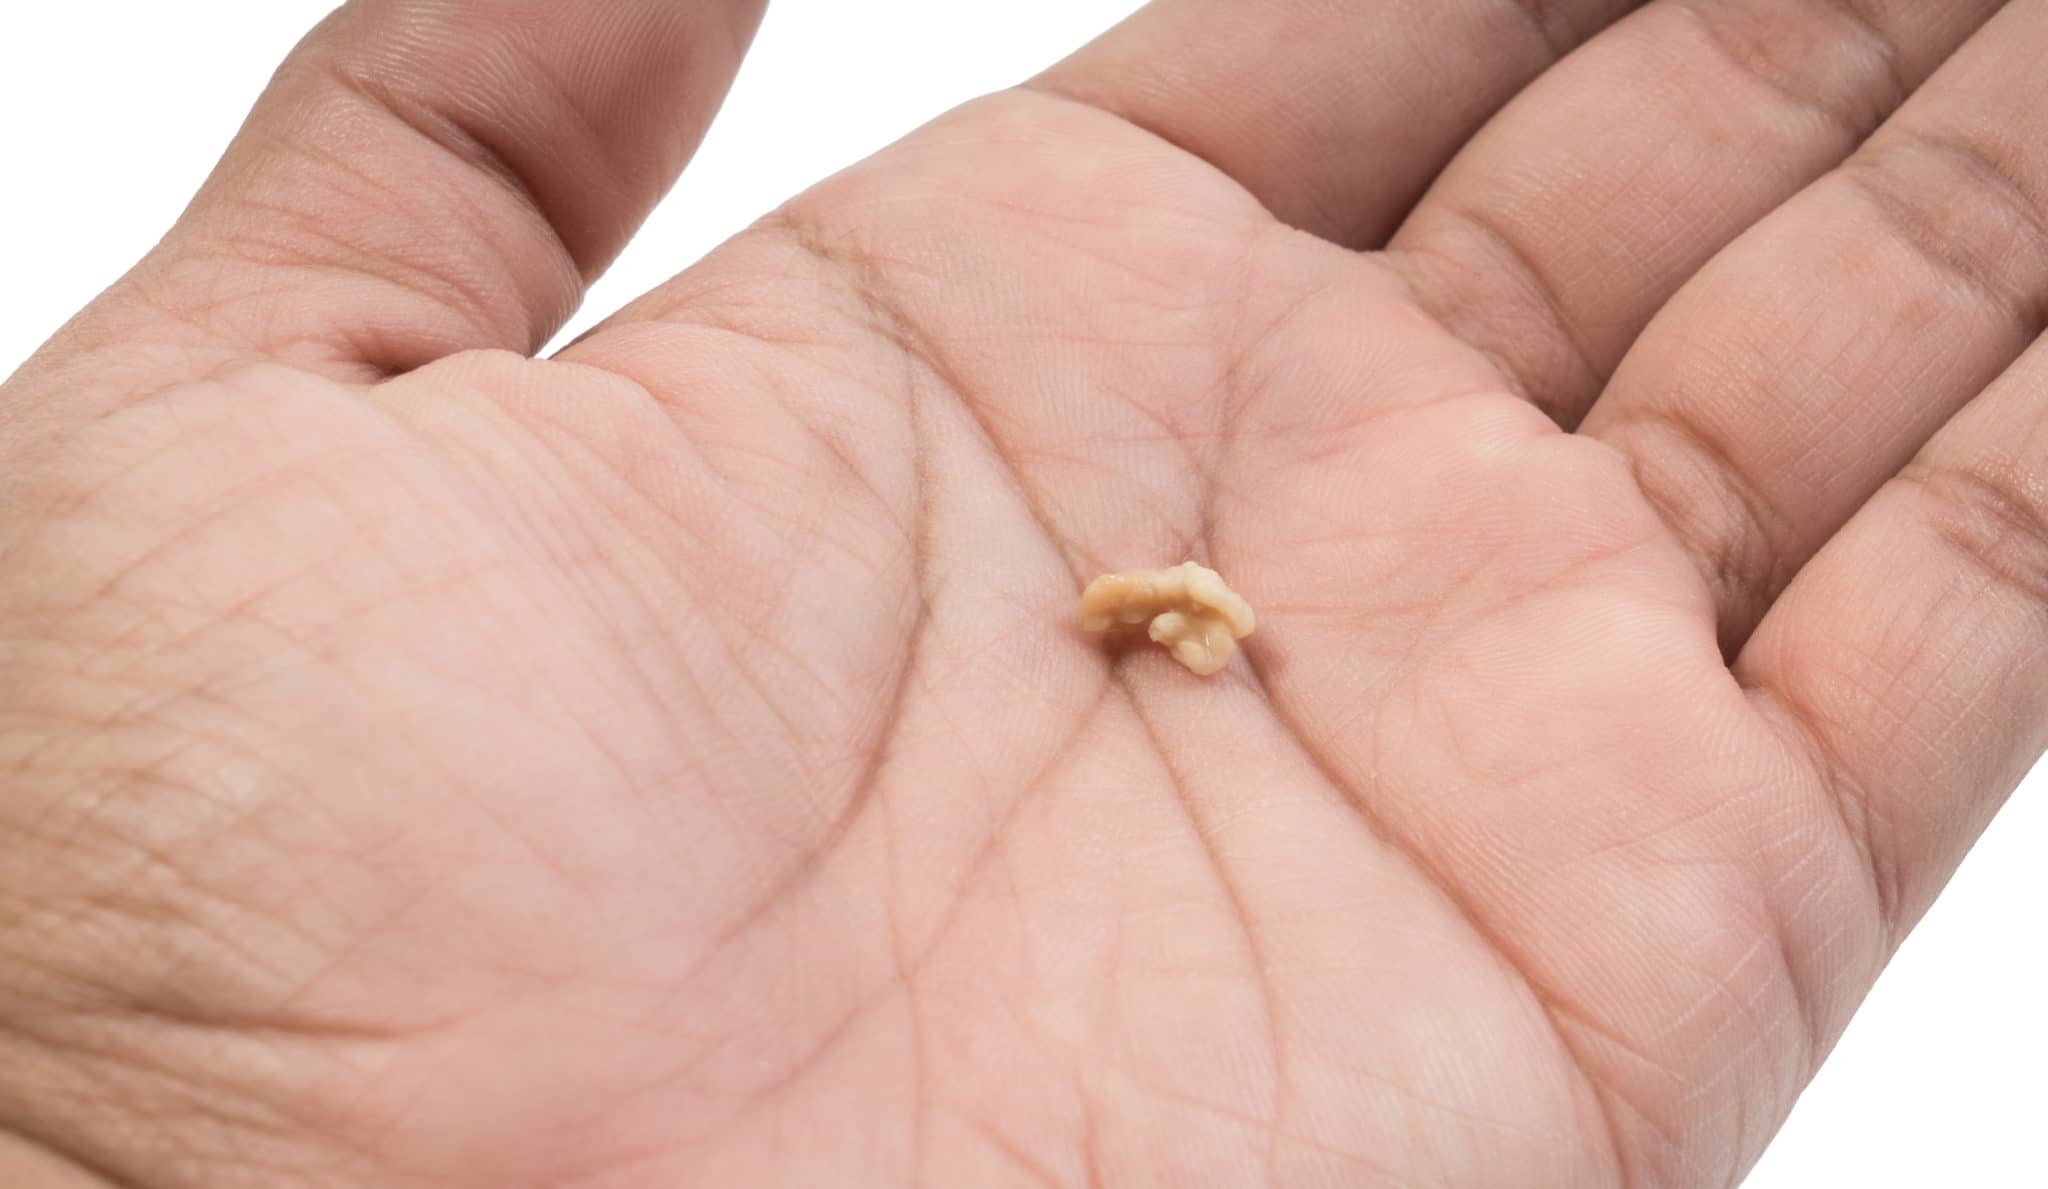 a tonsil stone in a person's hand